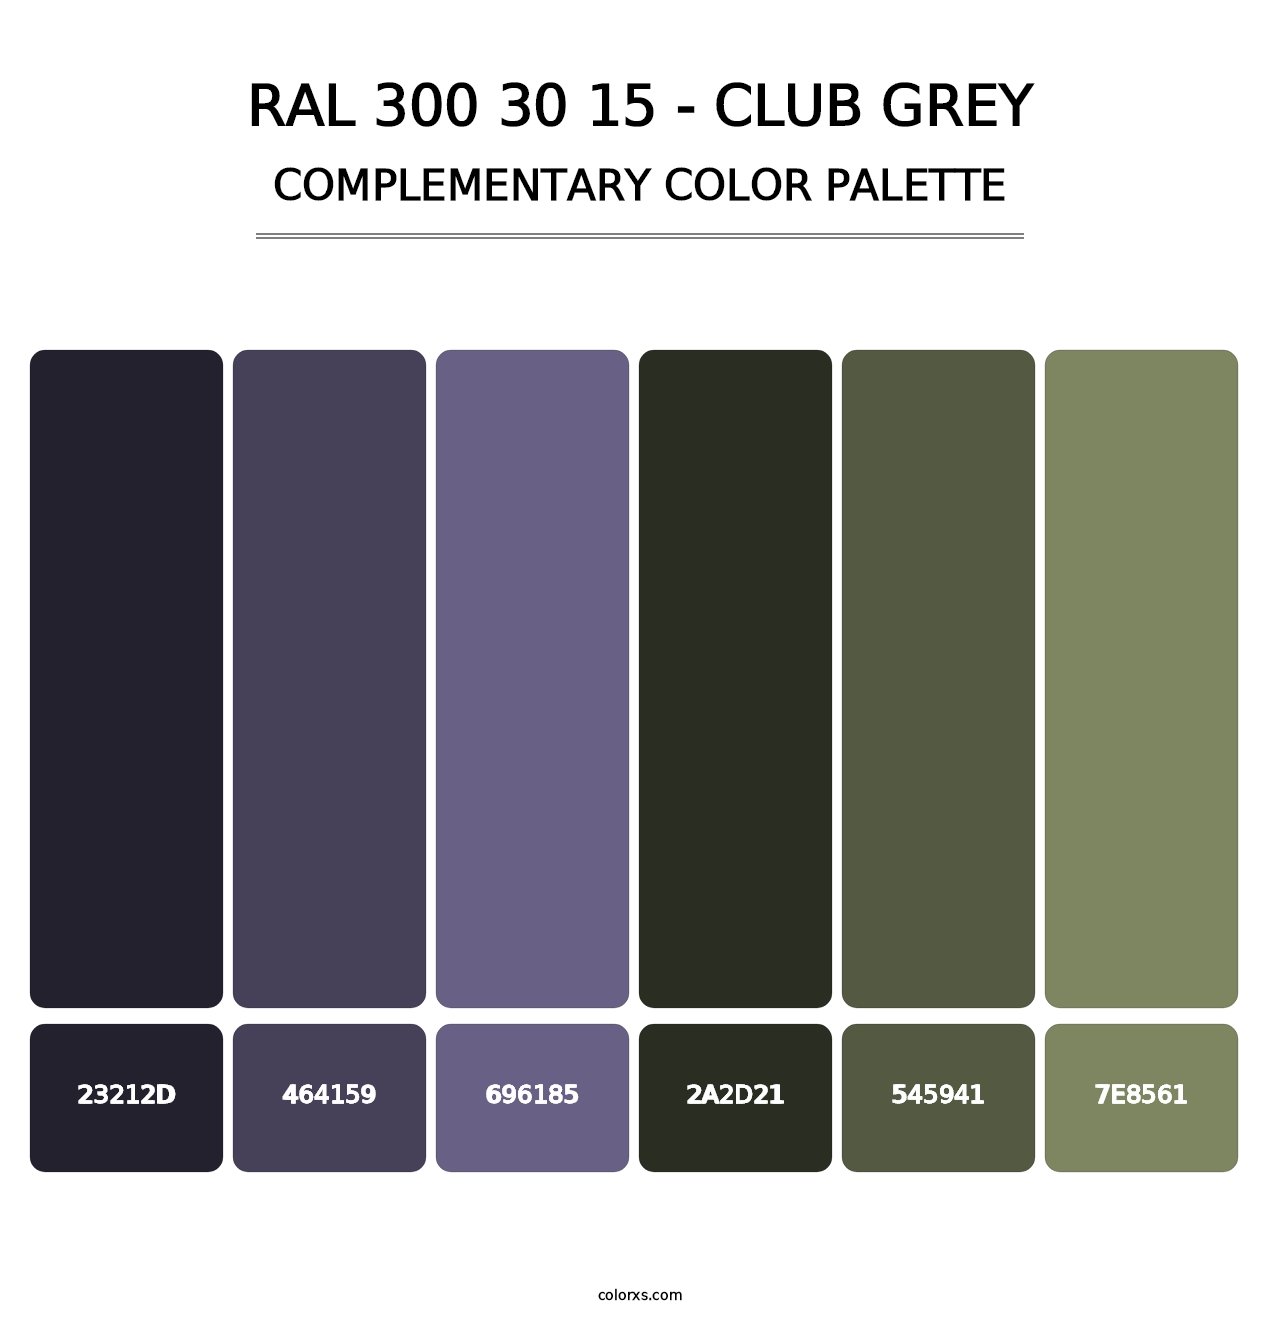 RAL 300 30 15 - Club Grey - Complementary Color Palette